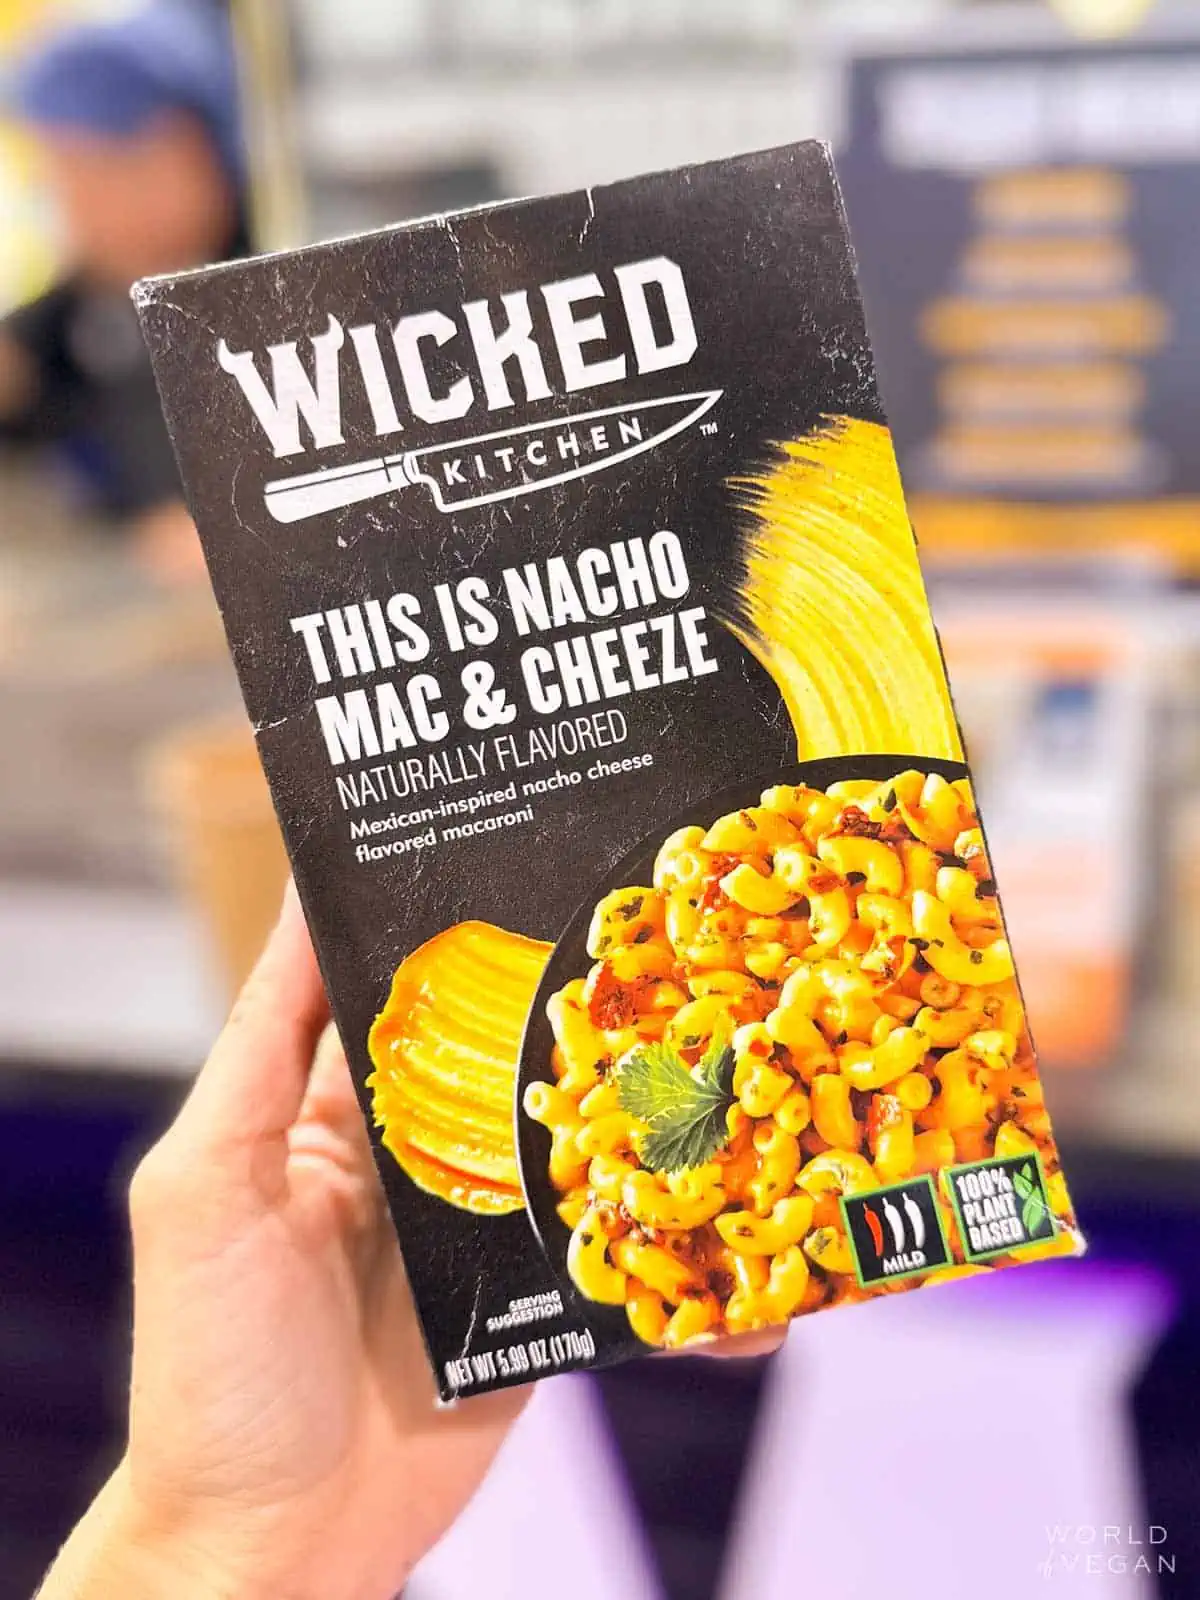 A box of Wicked Kitchen brand vegan mac and cheese.